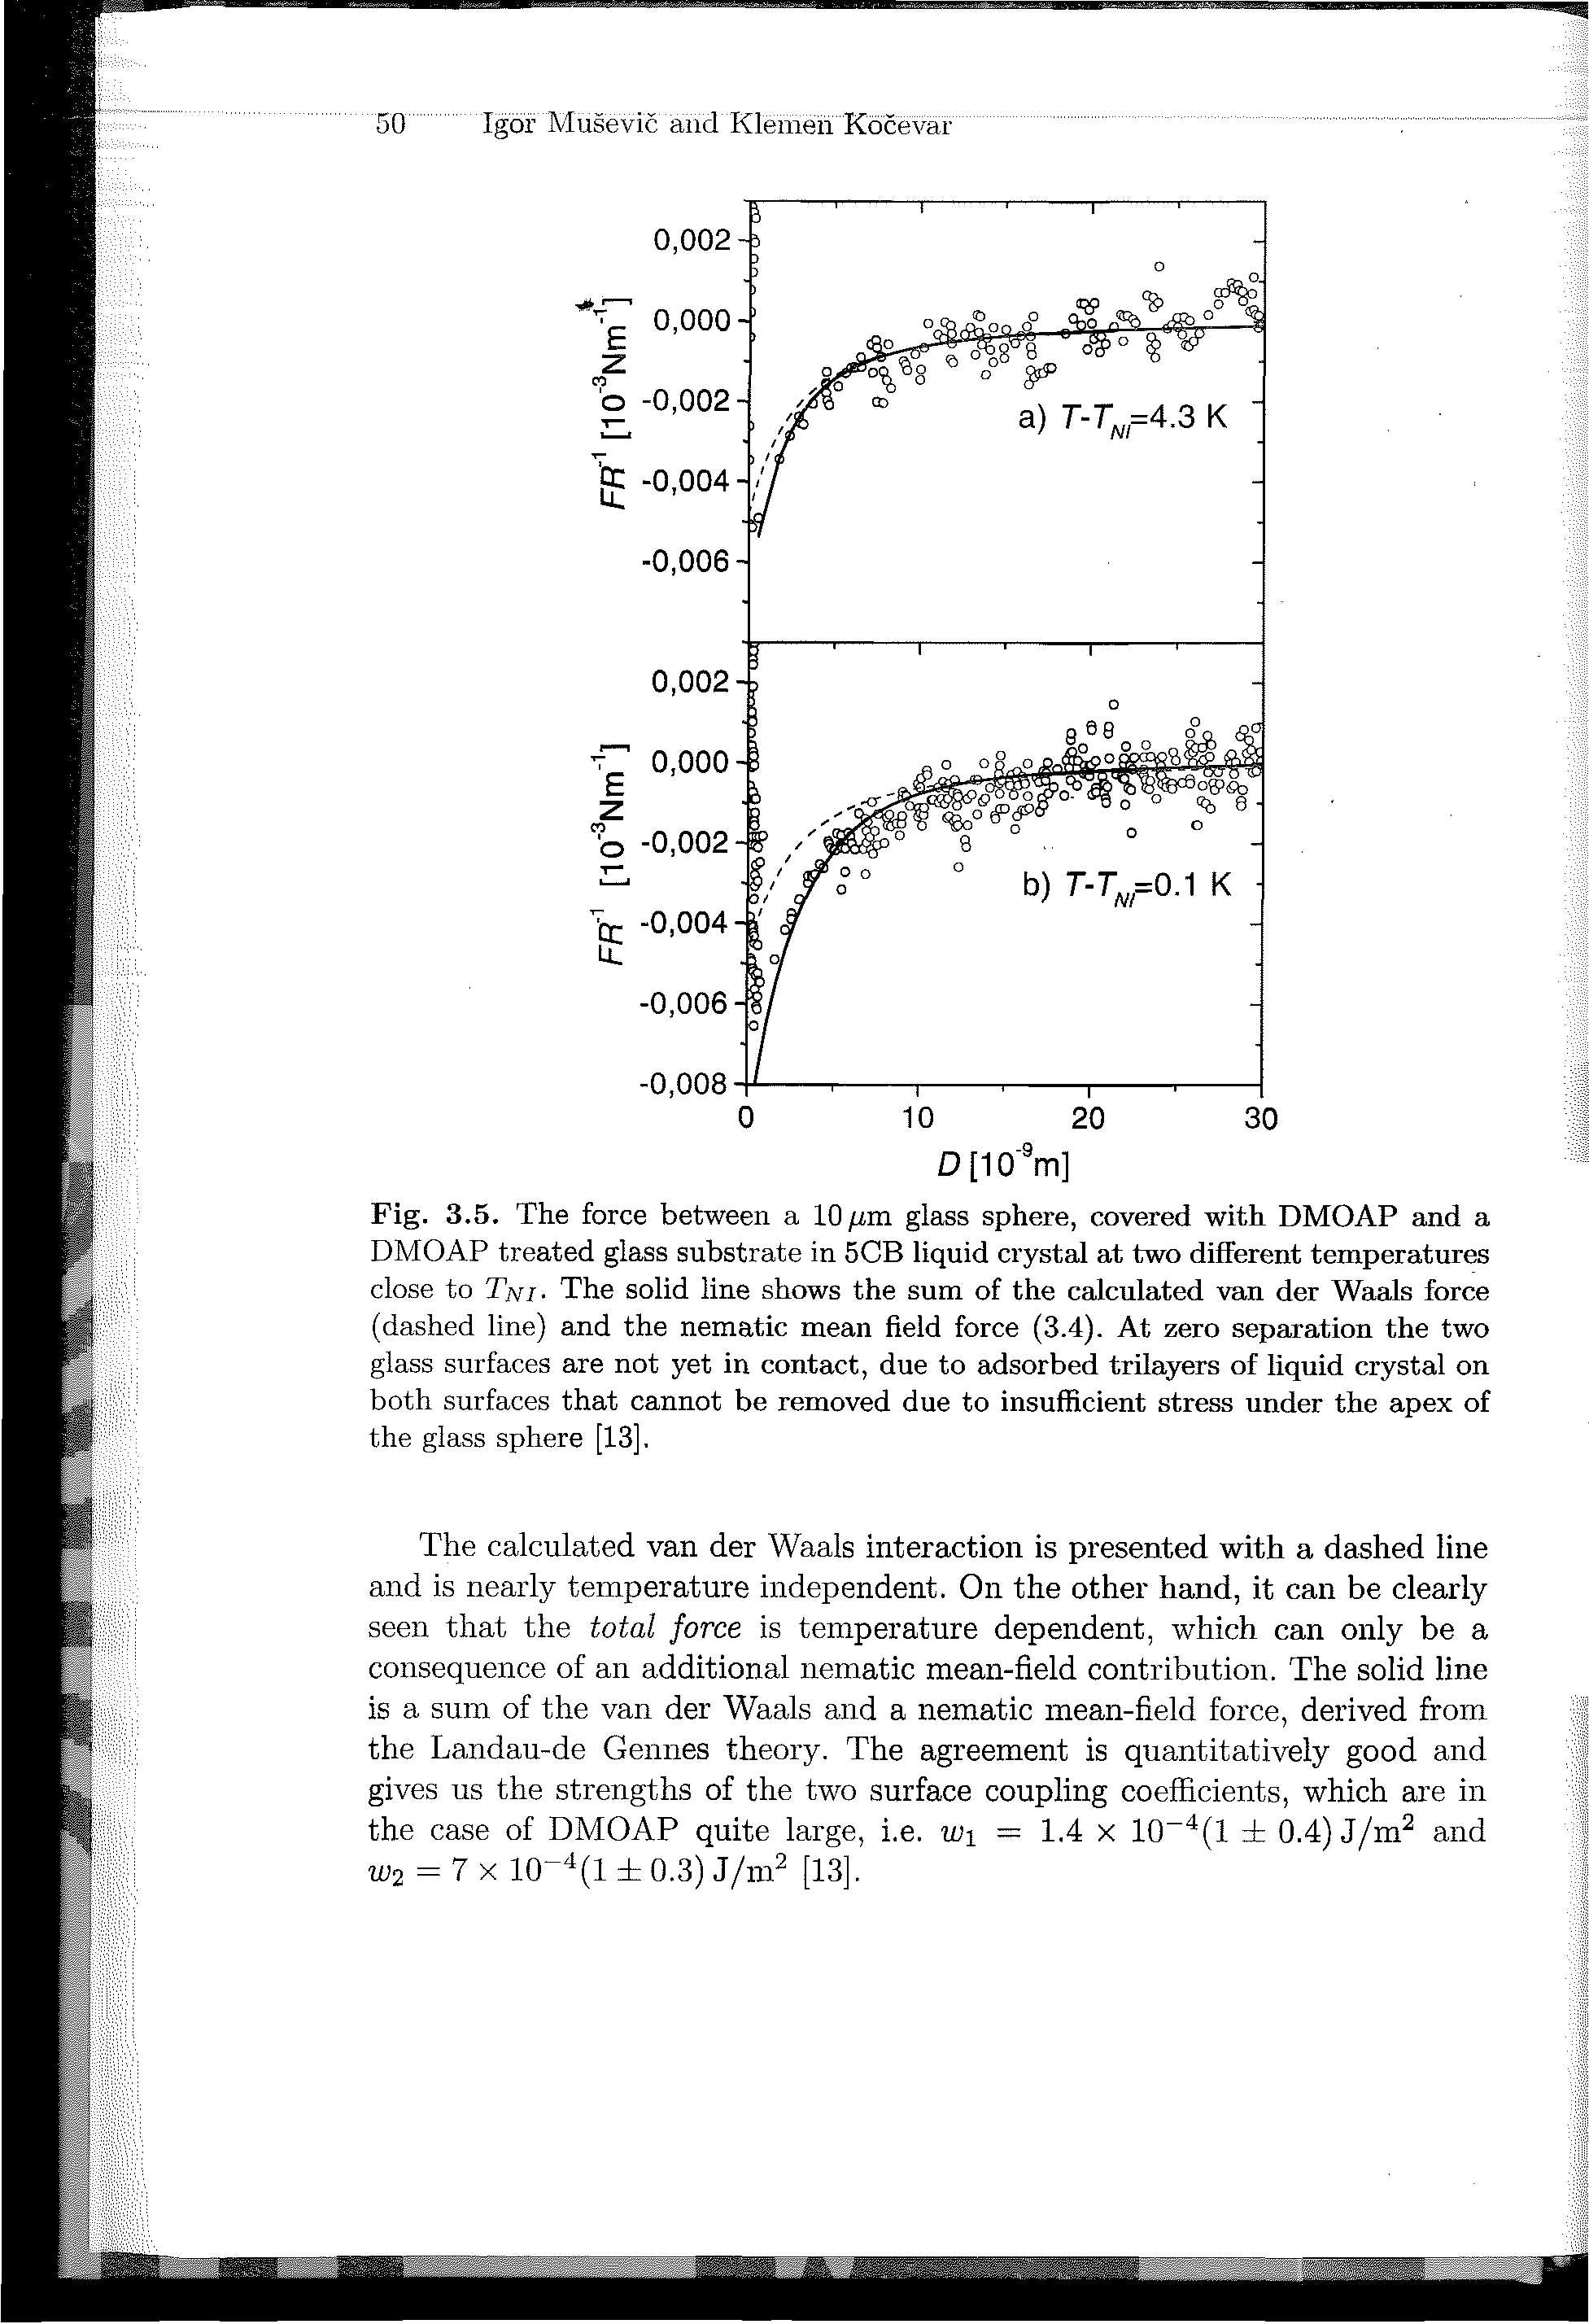 Fig. 3.5. The force between a 10 im glass sphere, covered with DMOAP and a DMOAP treated glass substrate in 5CB liquid crystal at two different temperatures close to TnI The solid line shows the sum of the calculated van der Waals force (dashed line) and the nematic mean field force (3.4). At zero separation the two glass surfaces are not yet in contact, due to adsorbed trilayers of liquid crystal on both surfaces that cannot be removed due to insufficient stress under the apex of the glass sphere [13],...